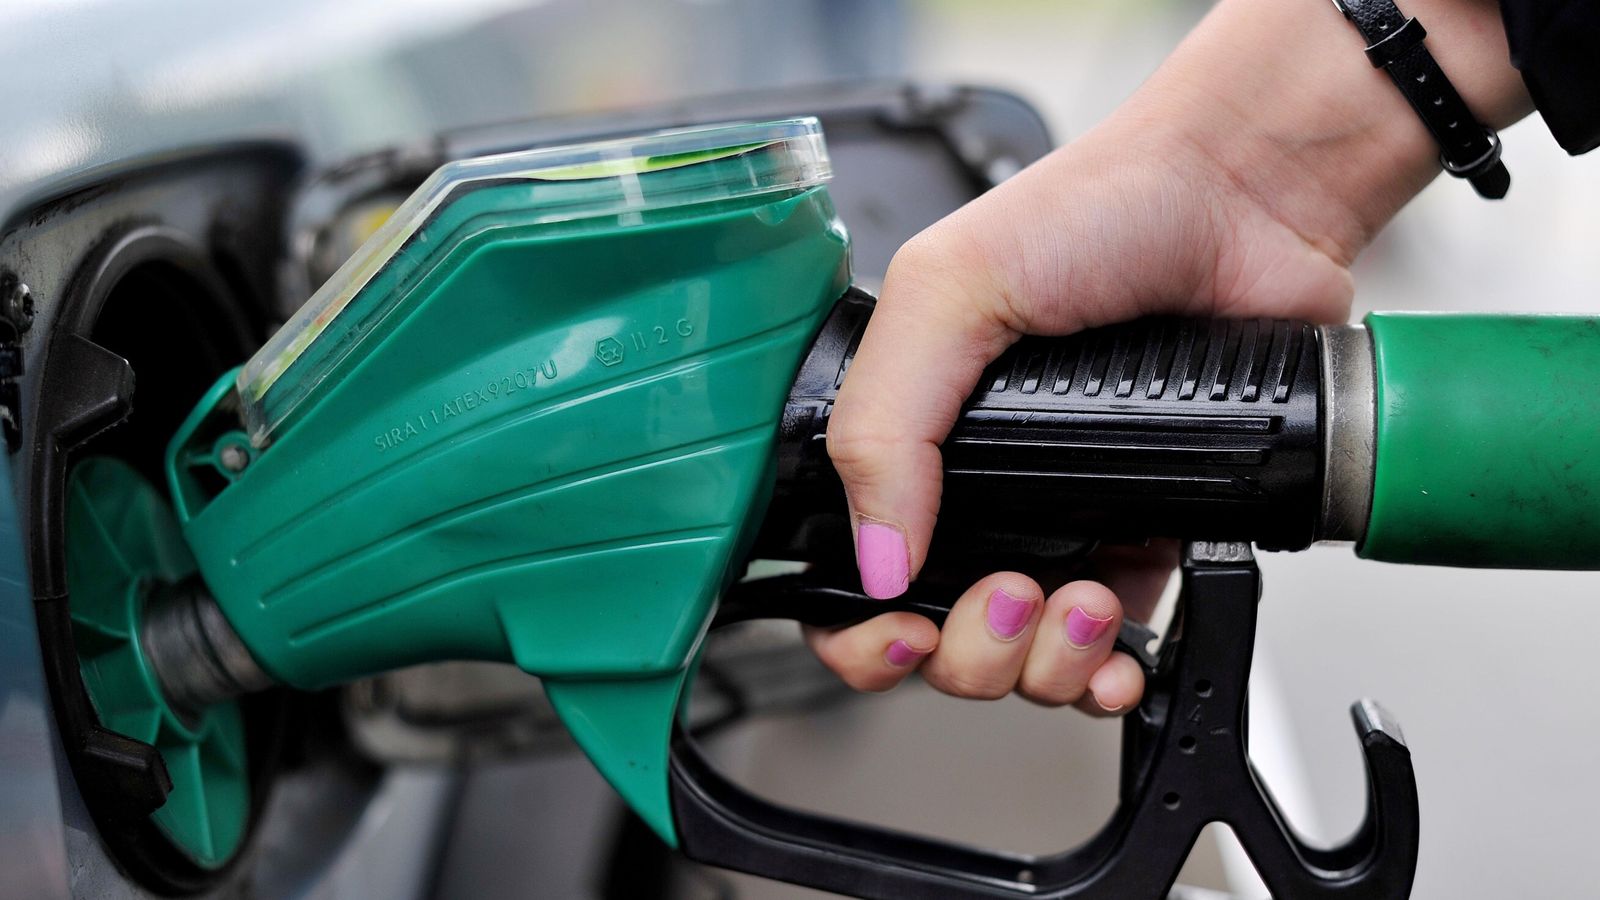 Retailers accused of keeping petrol and diesel prices high for 'no good reason' while Britain 'distracted' by election